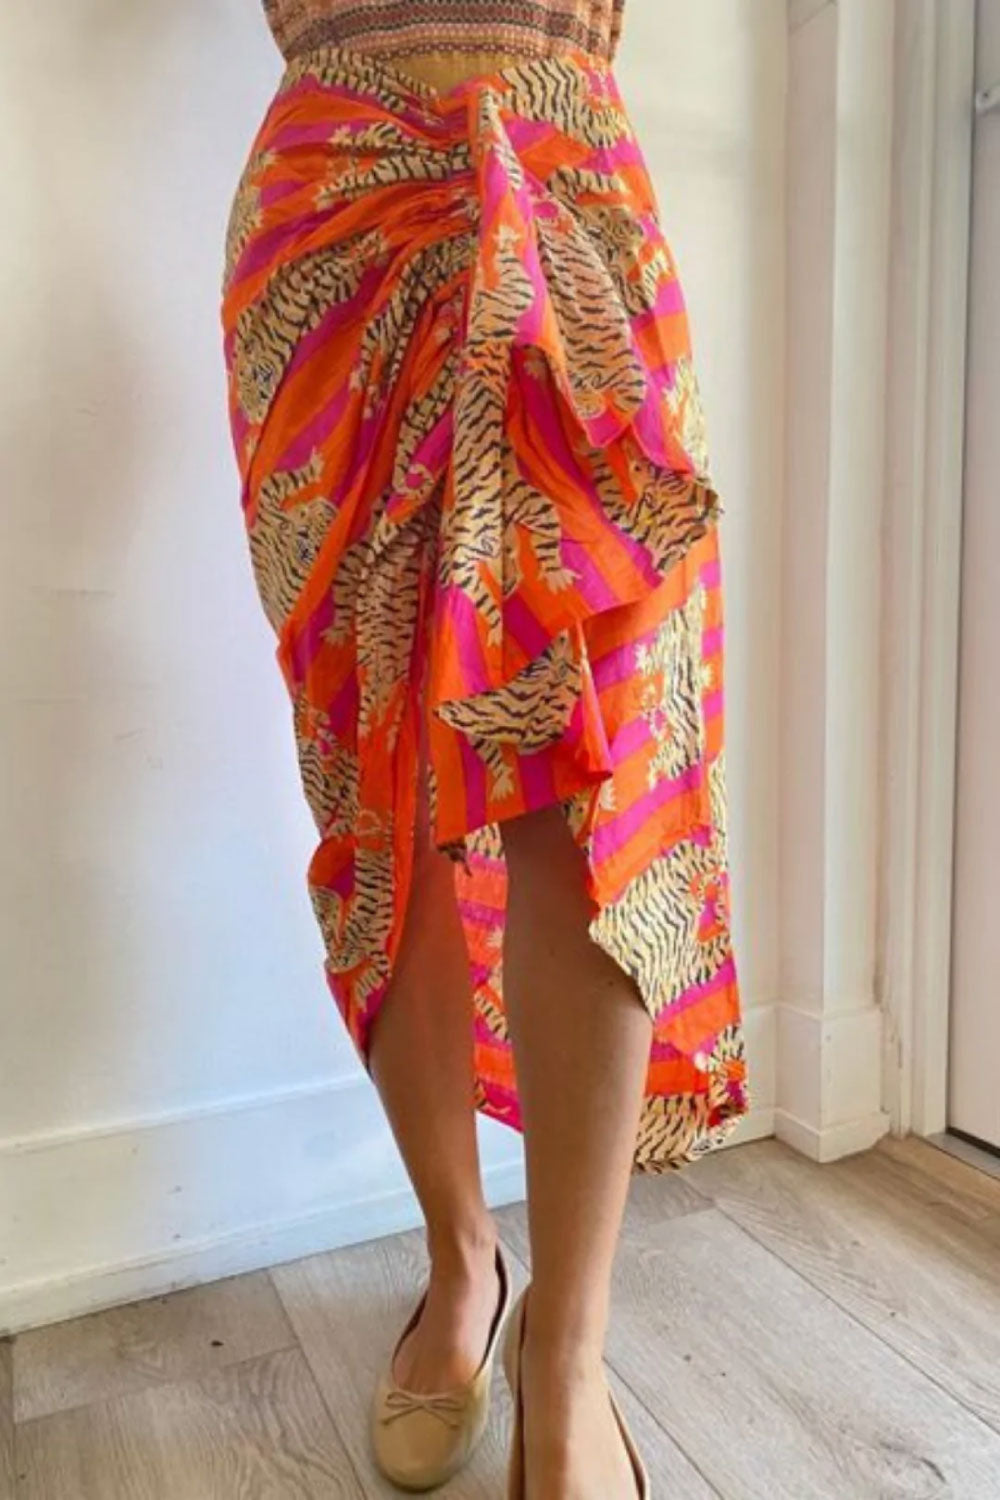 Image of the front of Guadalupe Design's Tiger Pareo Skirt in Orange.